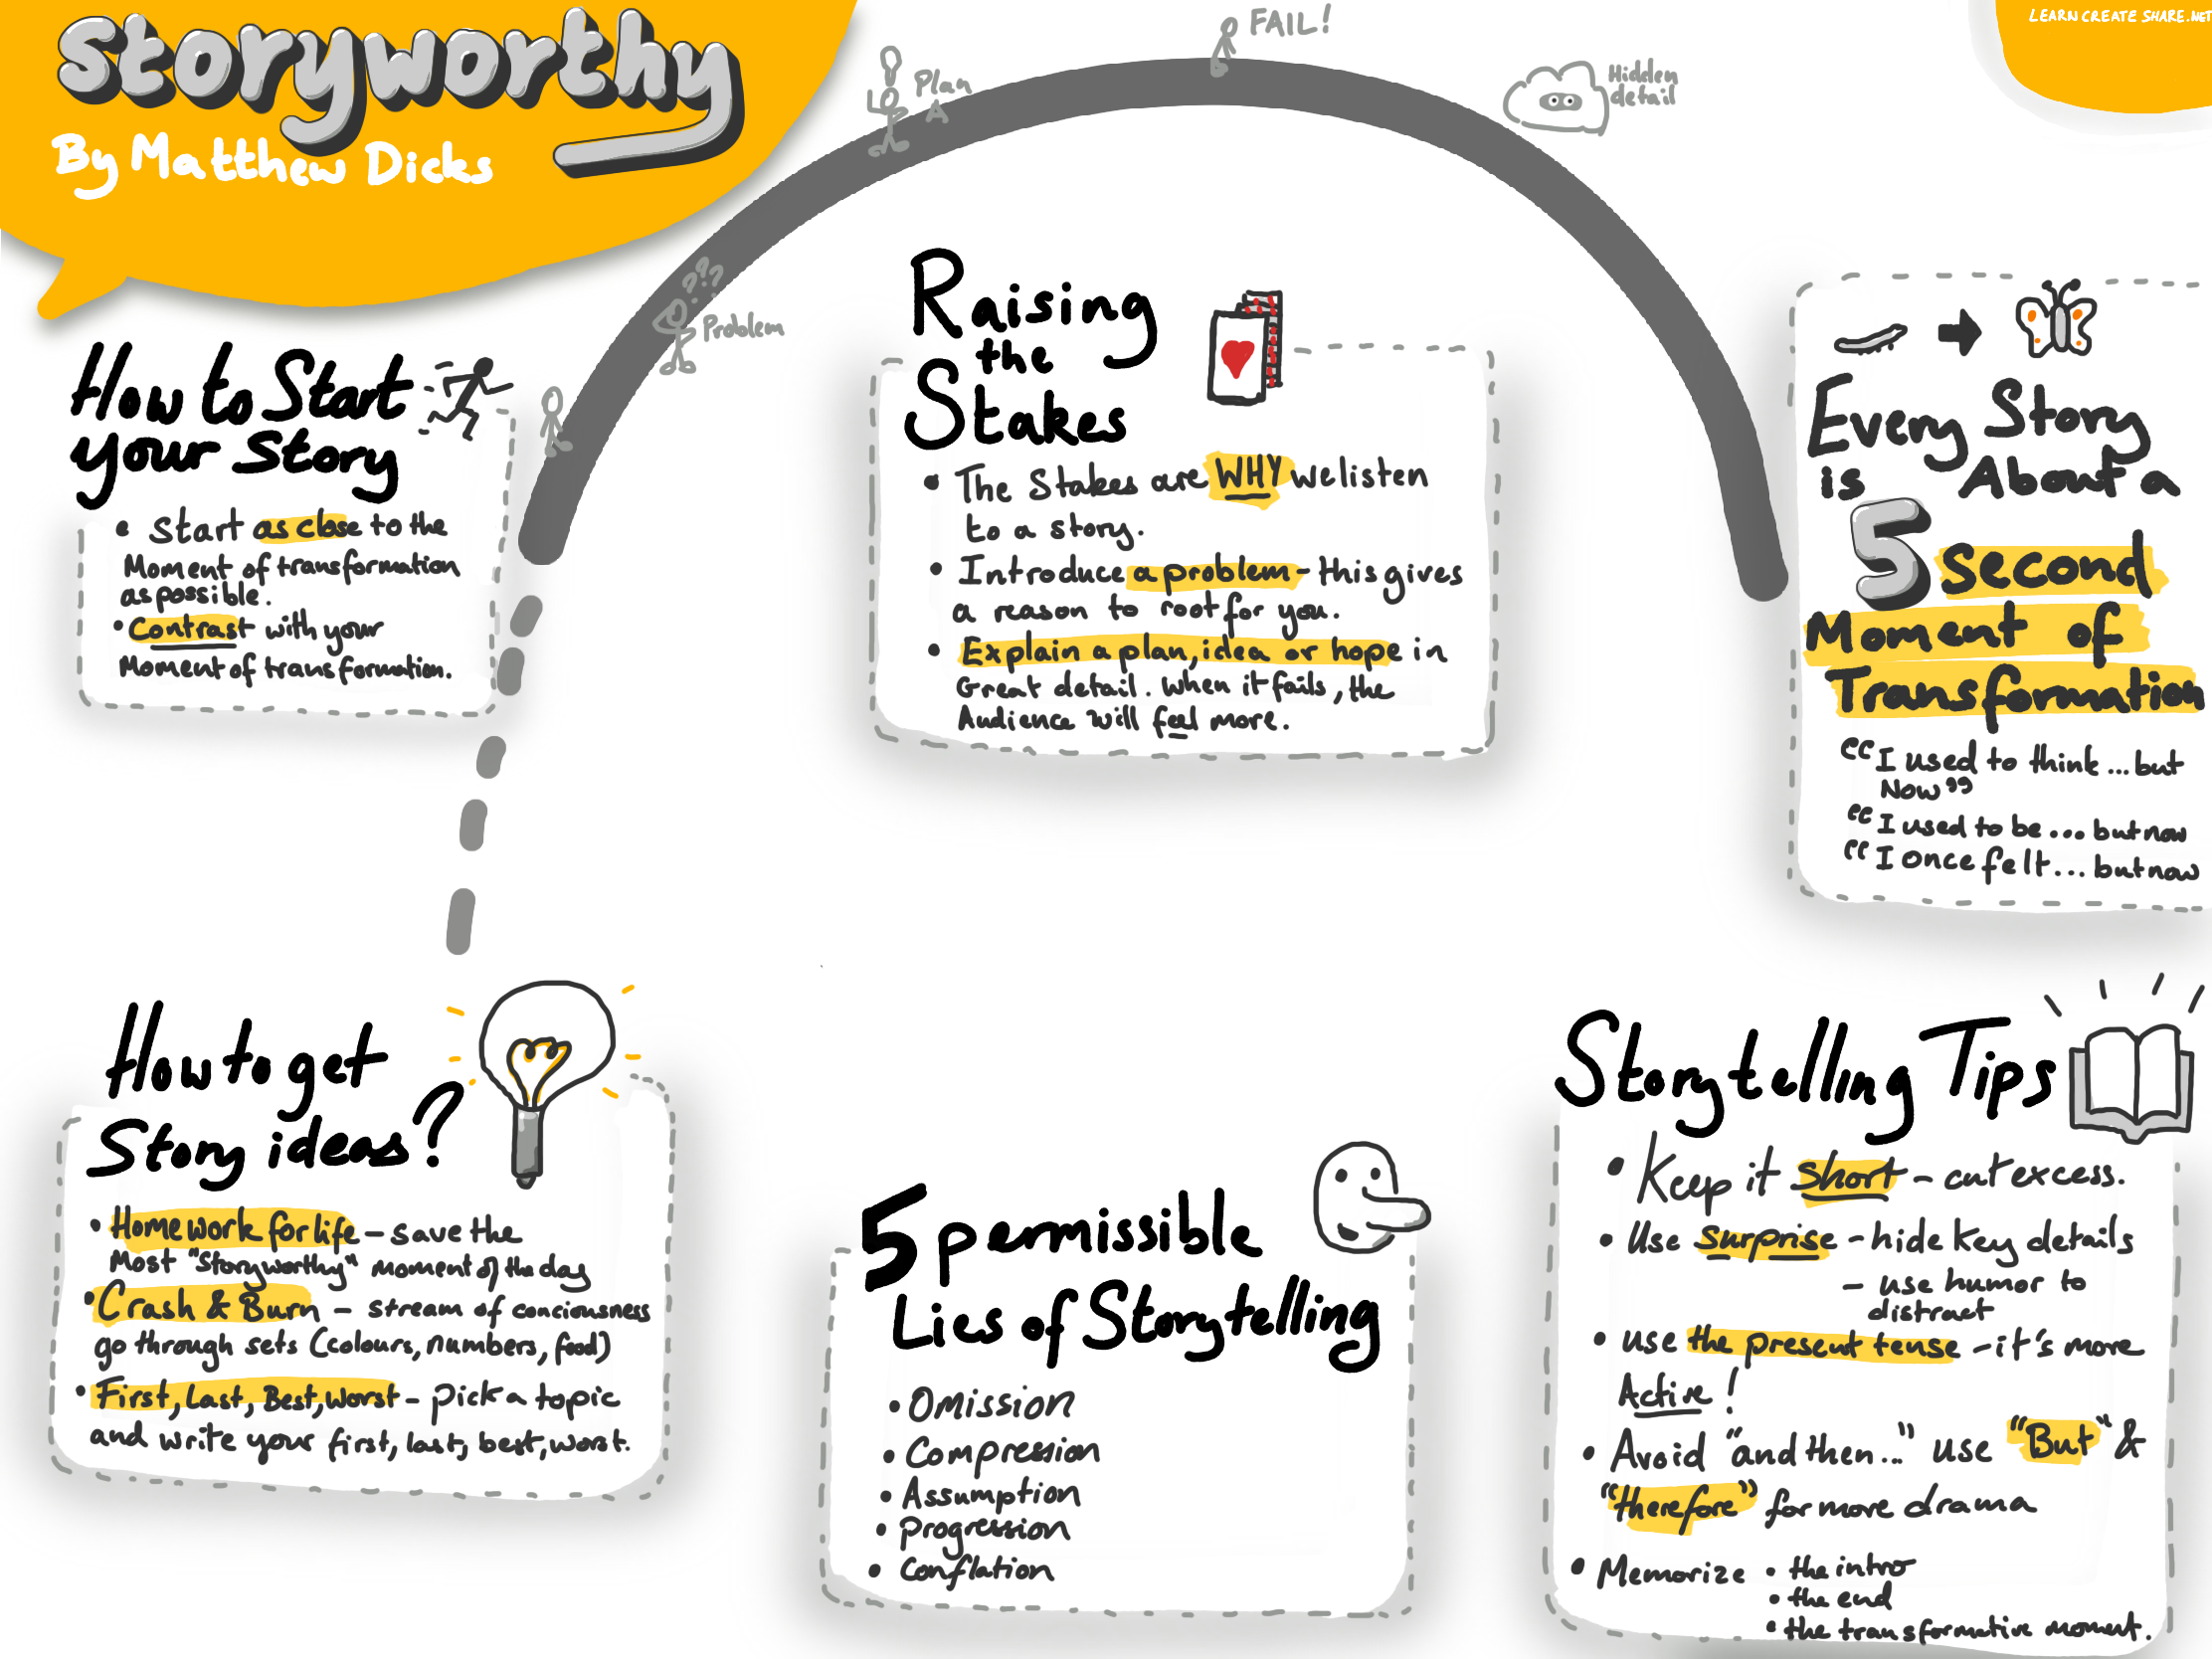 A sketchnote summary of the storyworthy book by Matthew Dicks